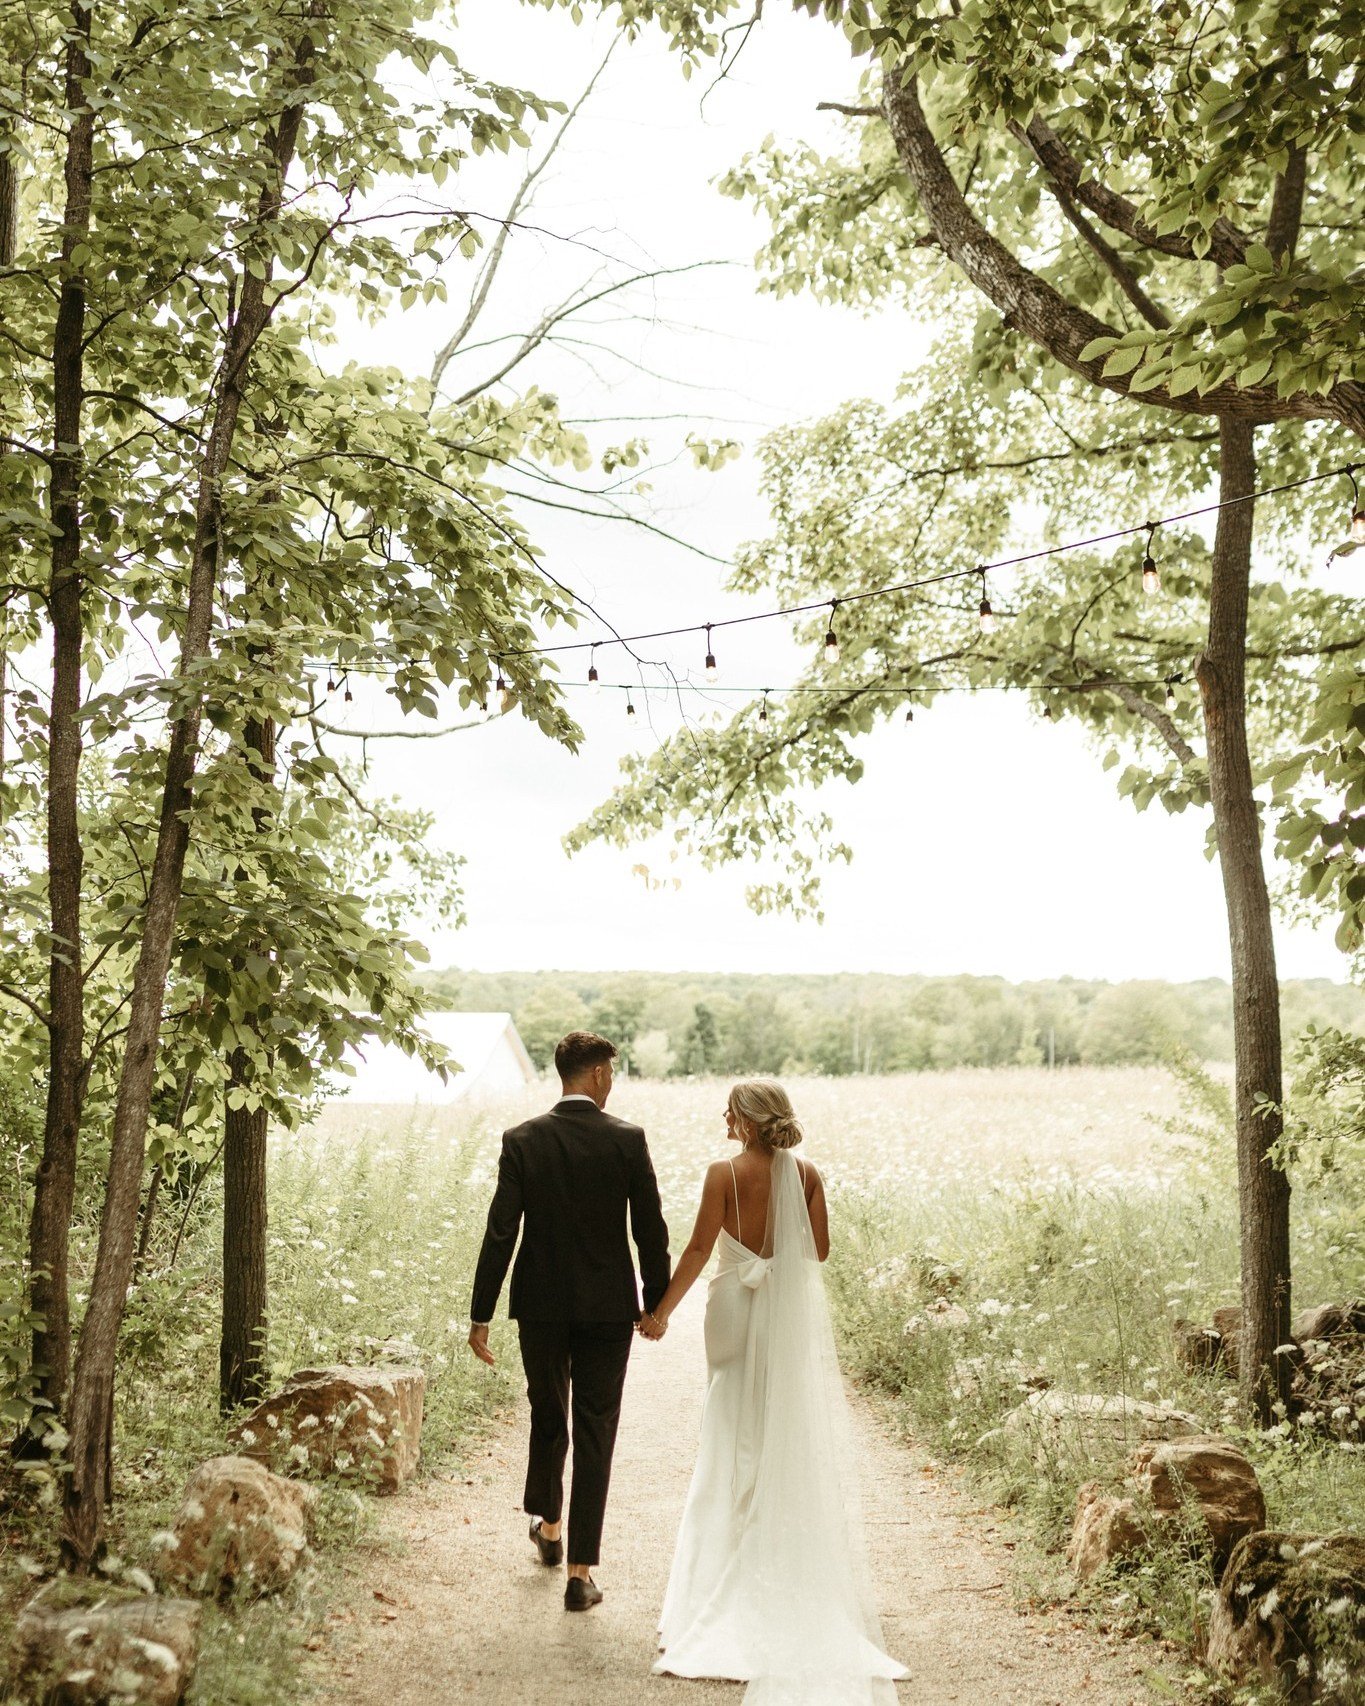 Northern Haus is the perfect setting for a dream destination wedding. Recently named &quot;Best WI Destination Venue&quot; by Wisconsin Bride. Reserve your 2024/2025 date today.

Photography: @livandremember
Couple @@melissamcano @acano792
Venue: @no